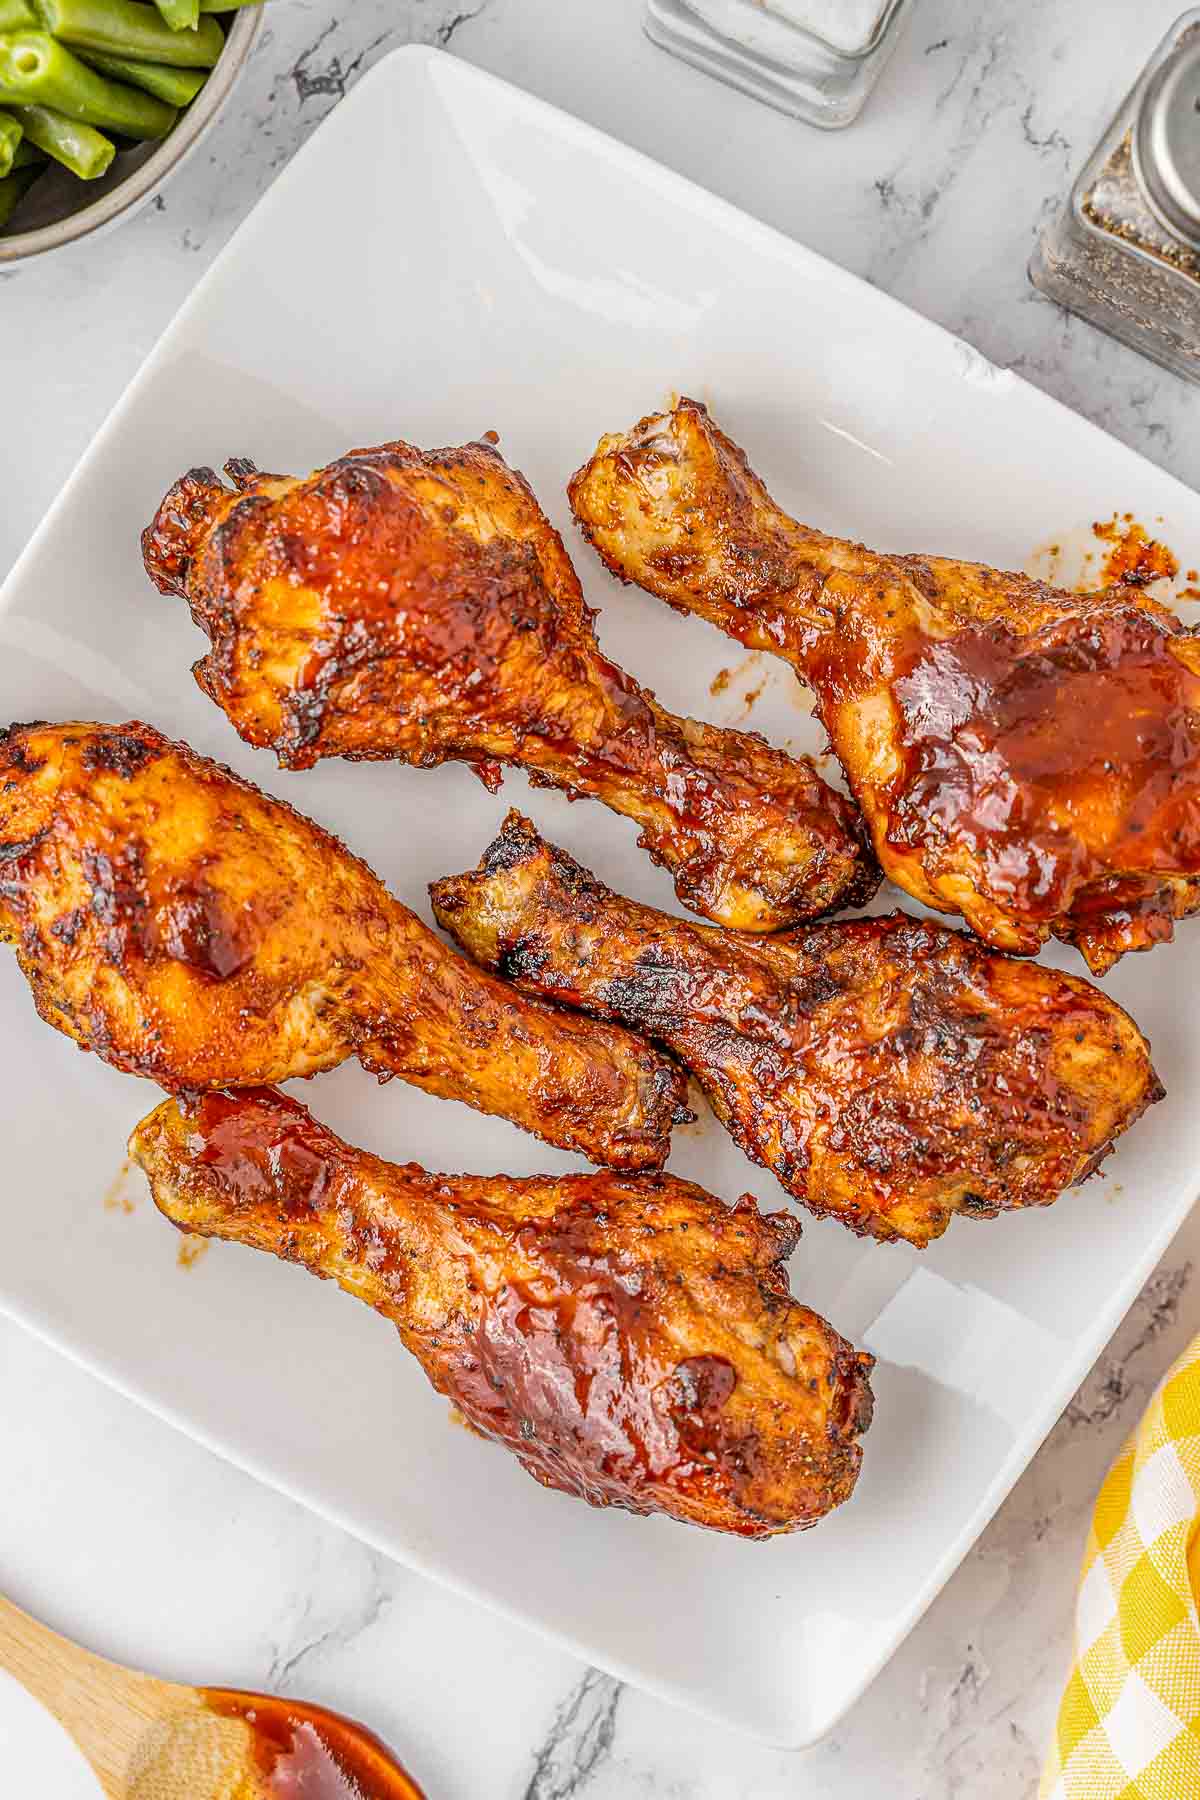 Multiple BBQ chicken drumsticks on a white plate.